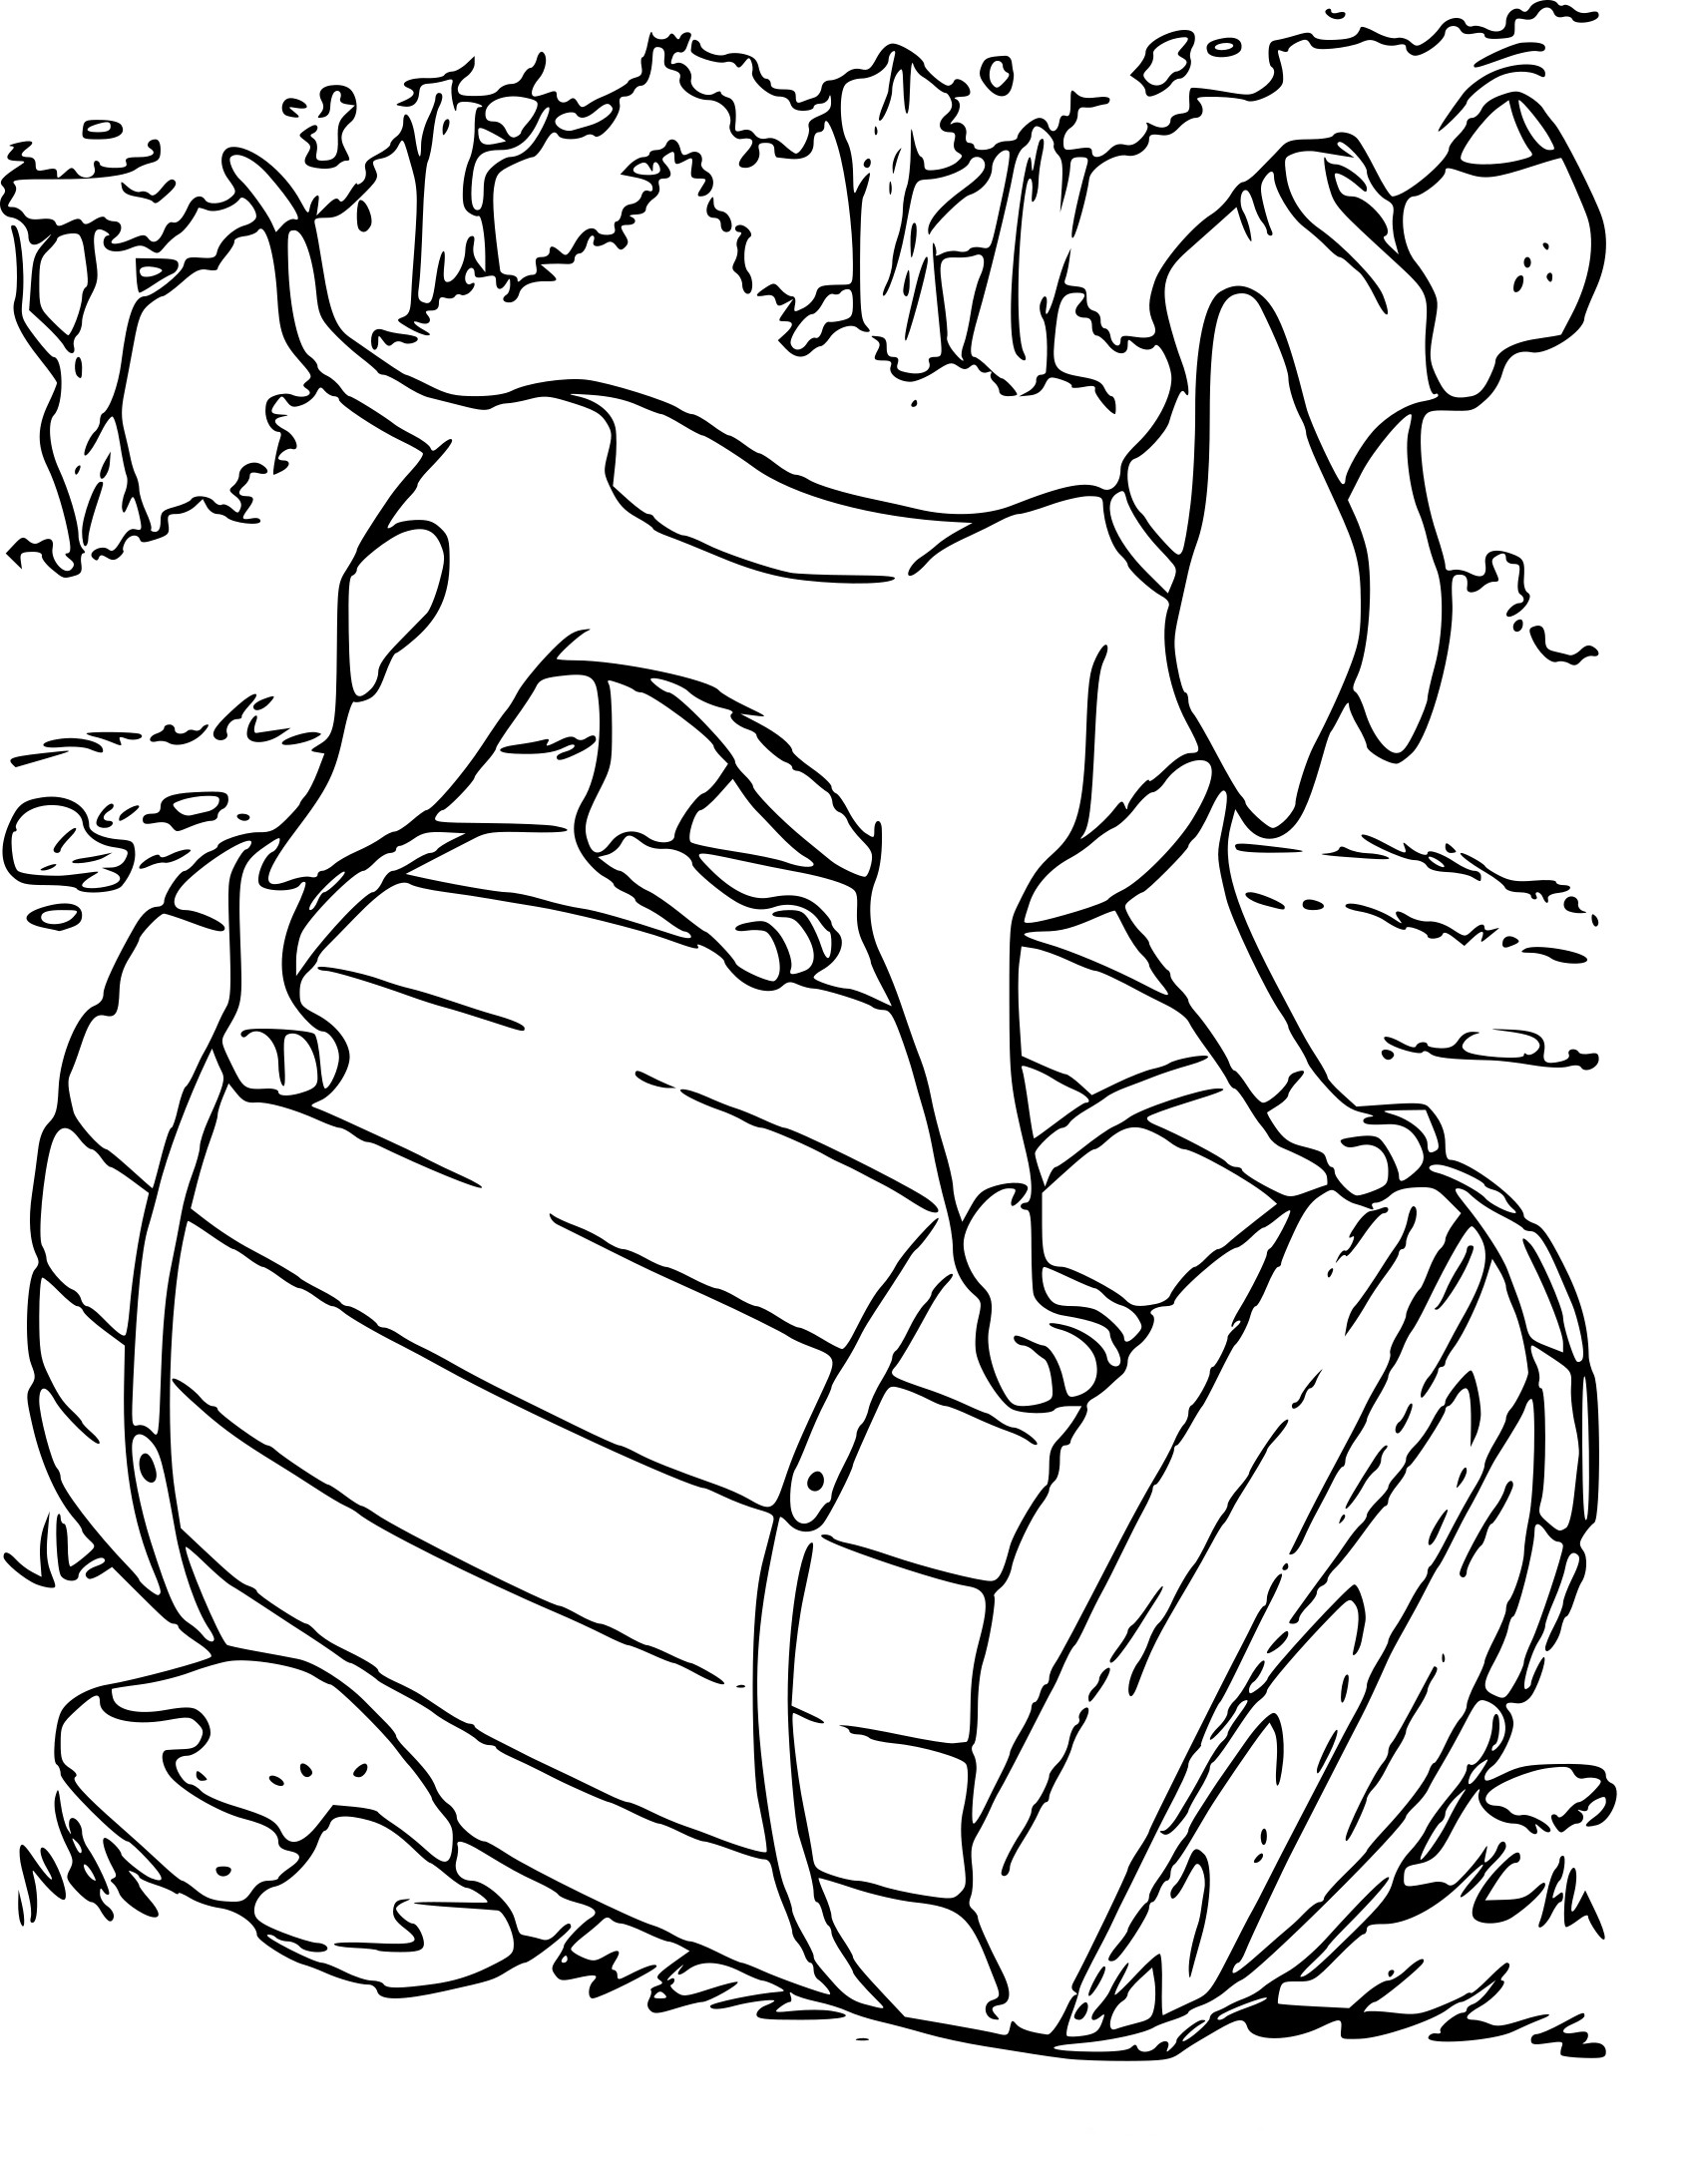 Rox And Rouky 2 coloring page